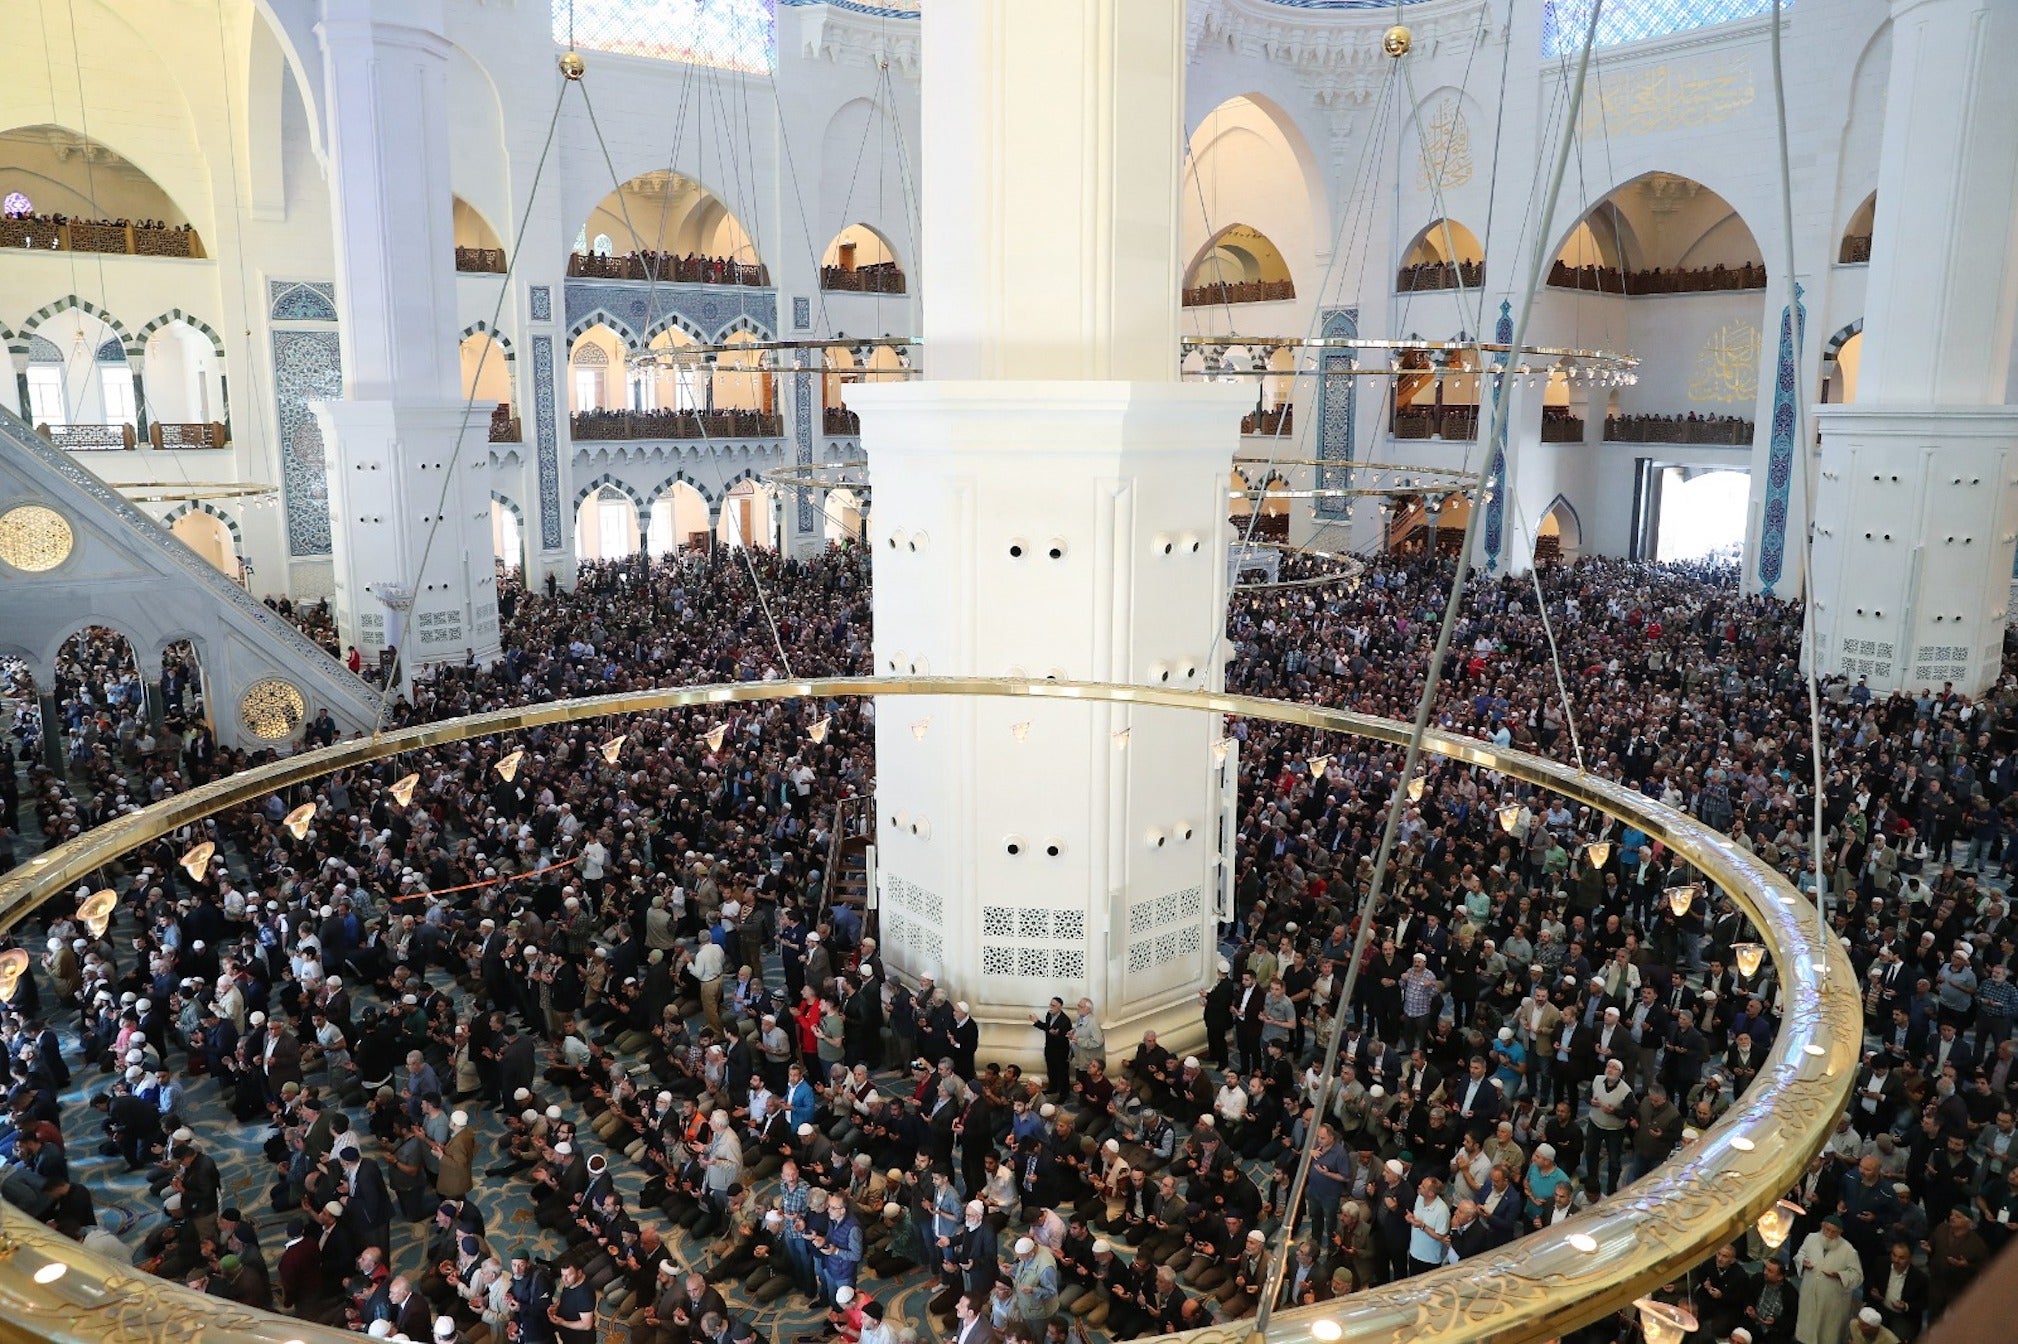 People attend the official opening ceremony of Camlica mosque in Istanbul, Turkey (EPA/TURKISH PRESIDENCY HANDOUT)